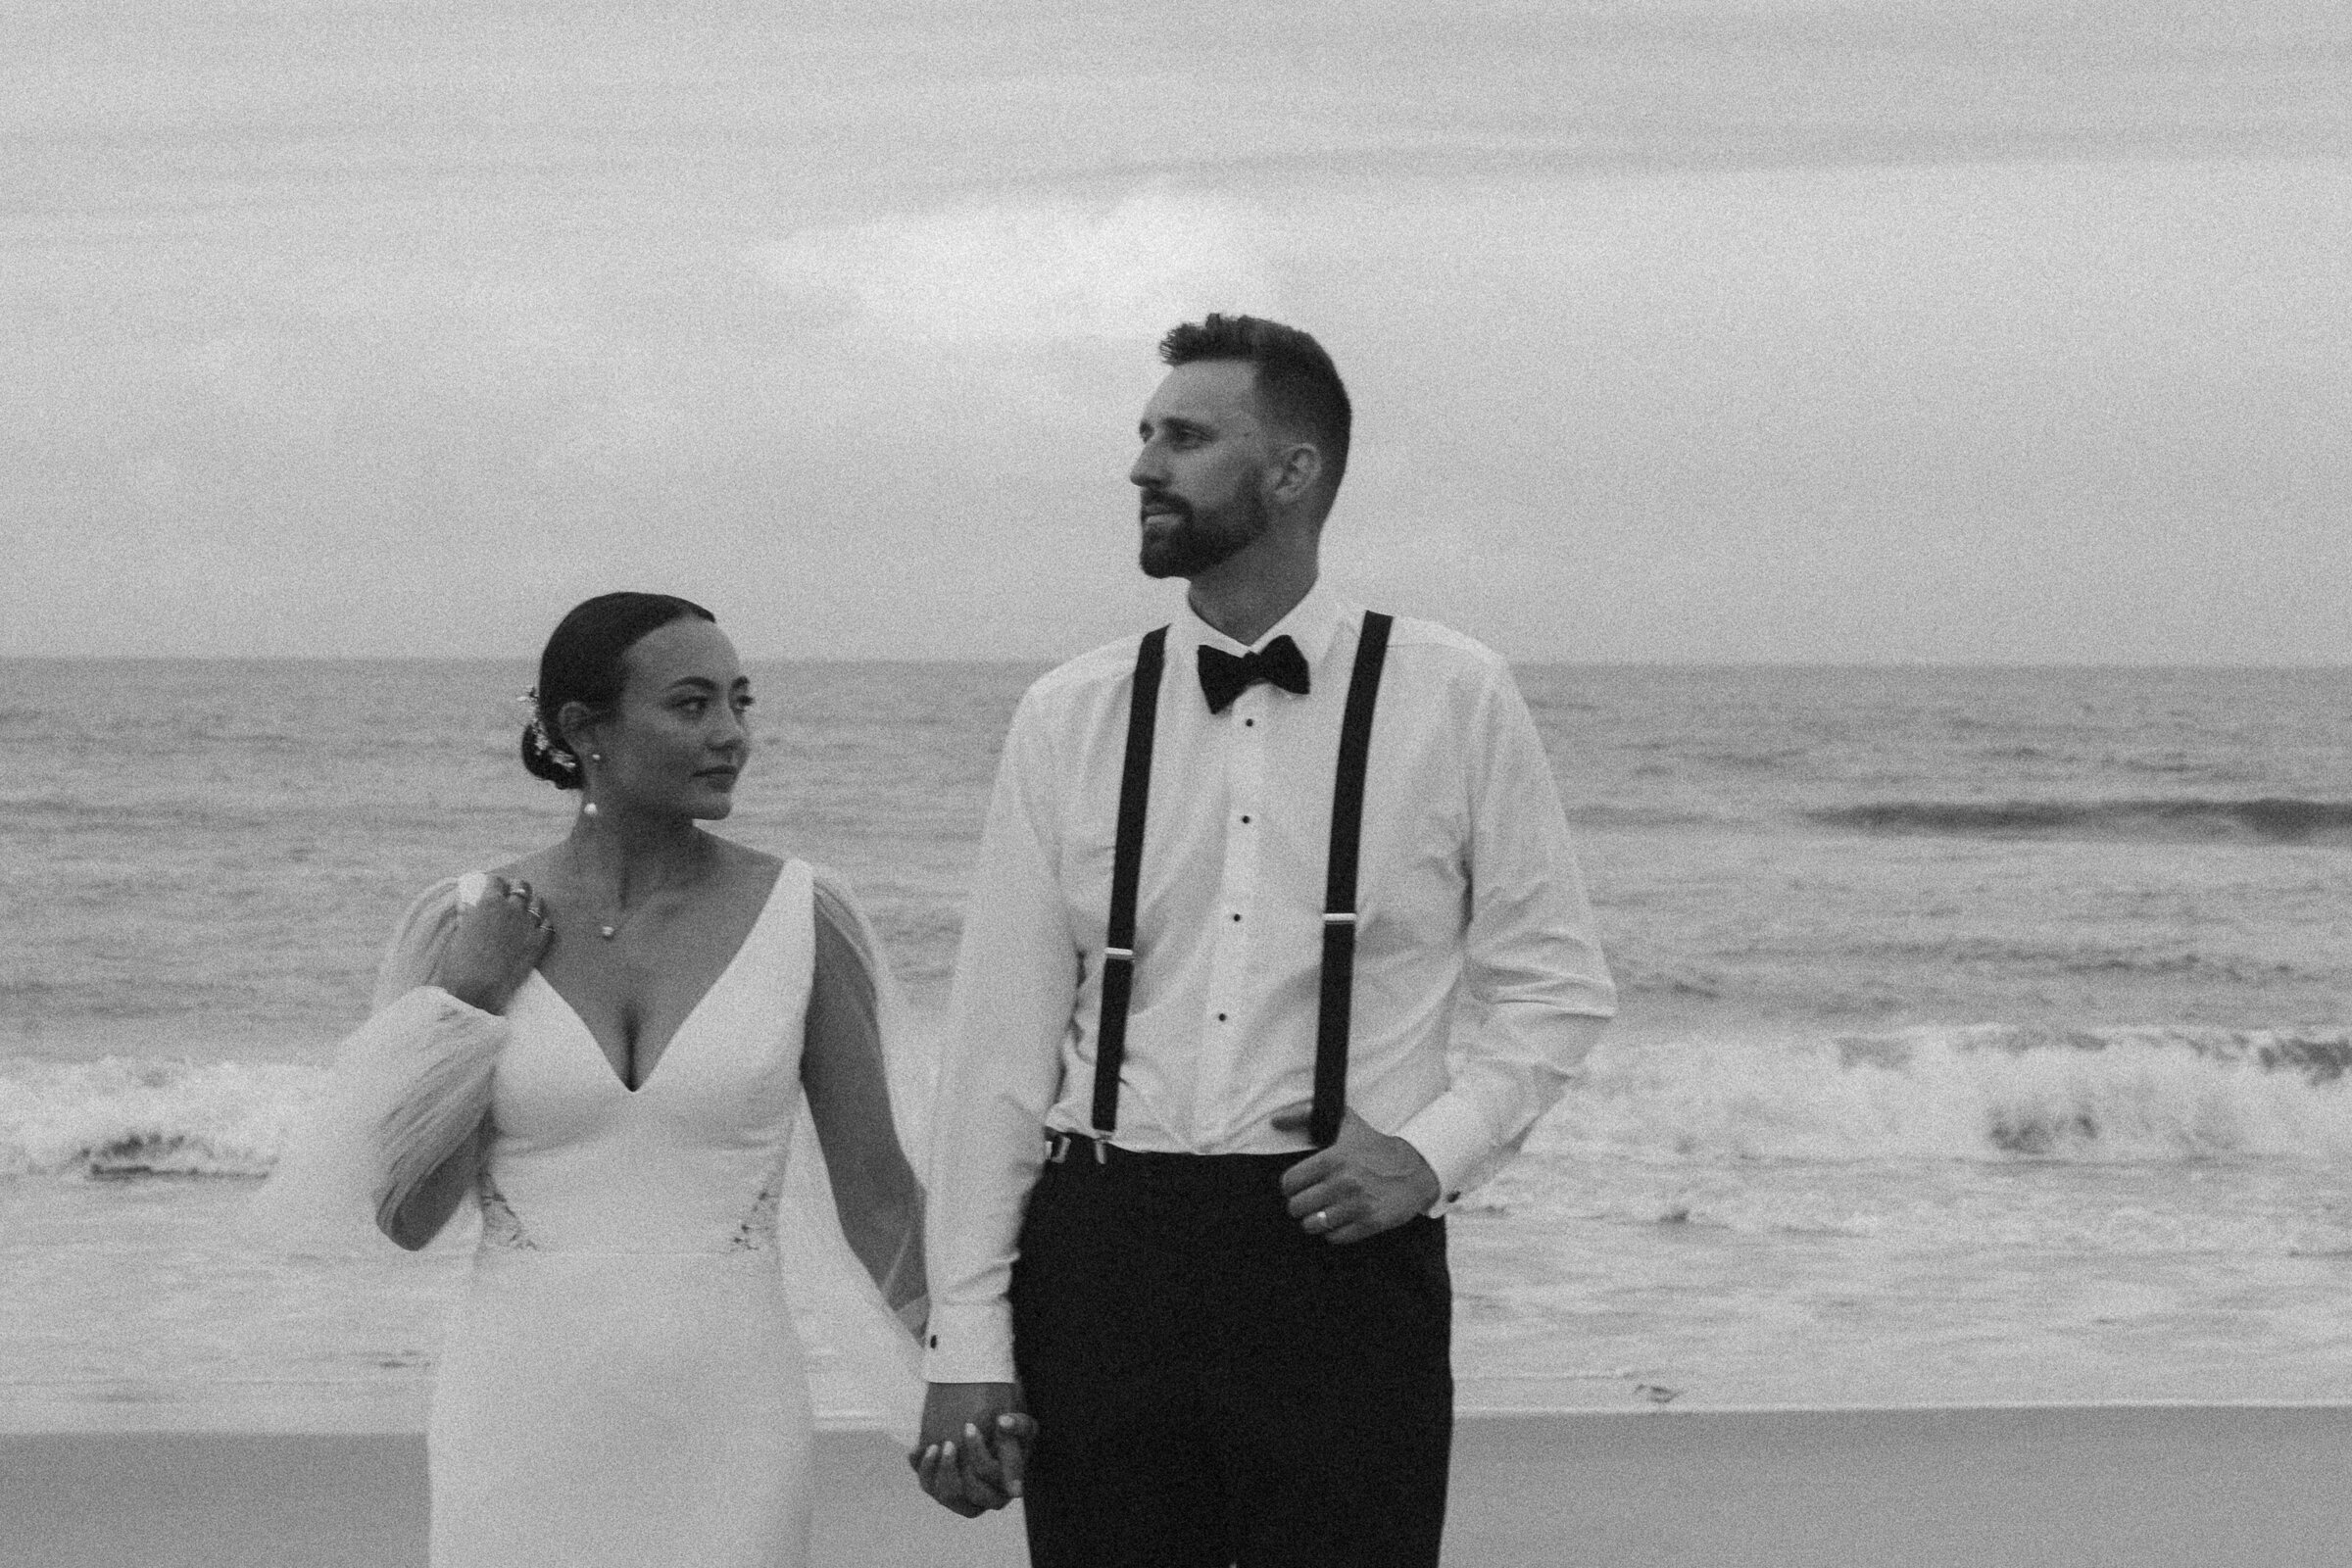 Bride and groom in black and white portrait by the sea.